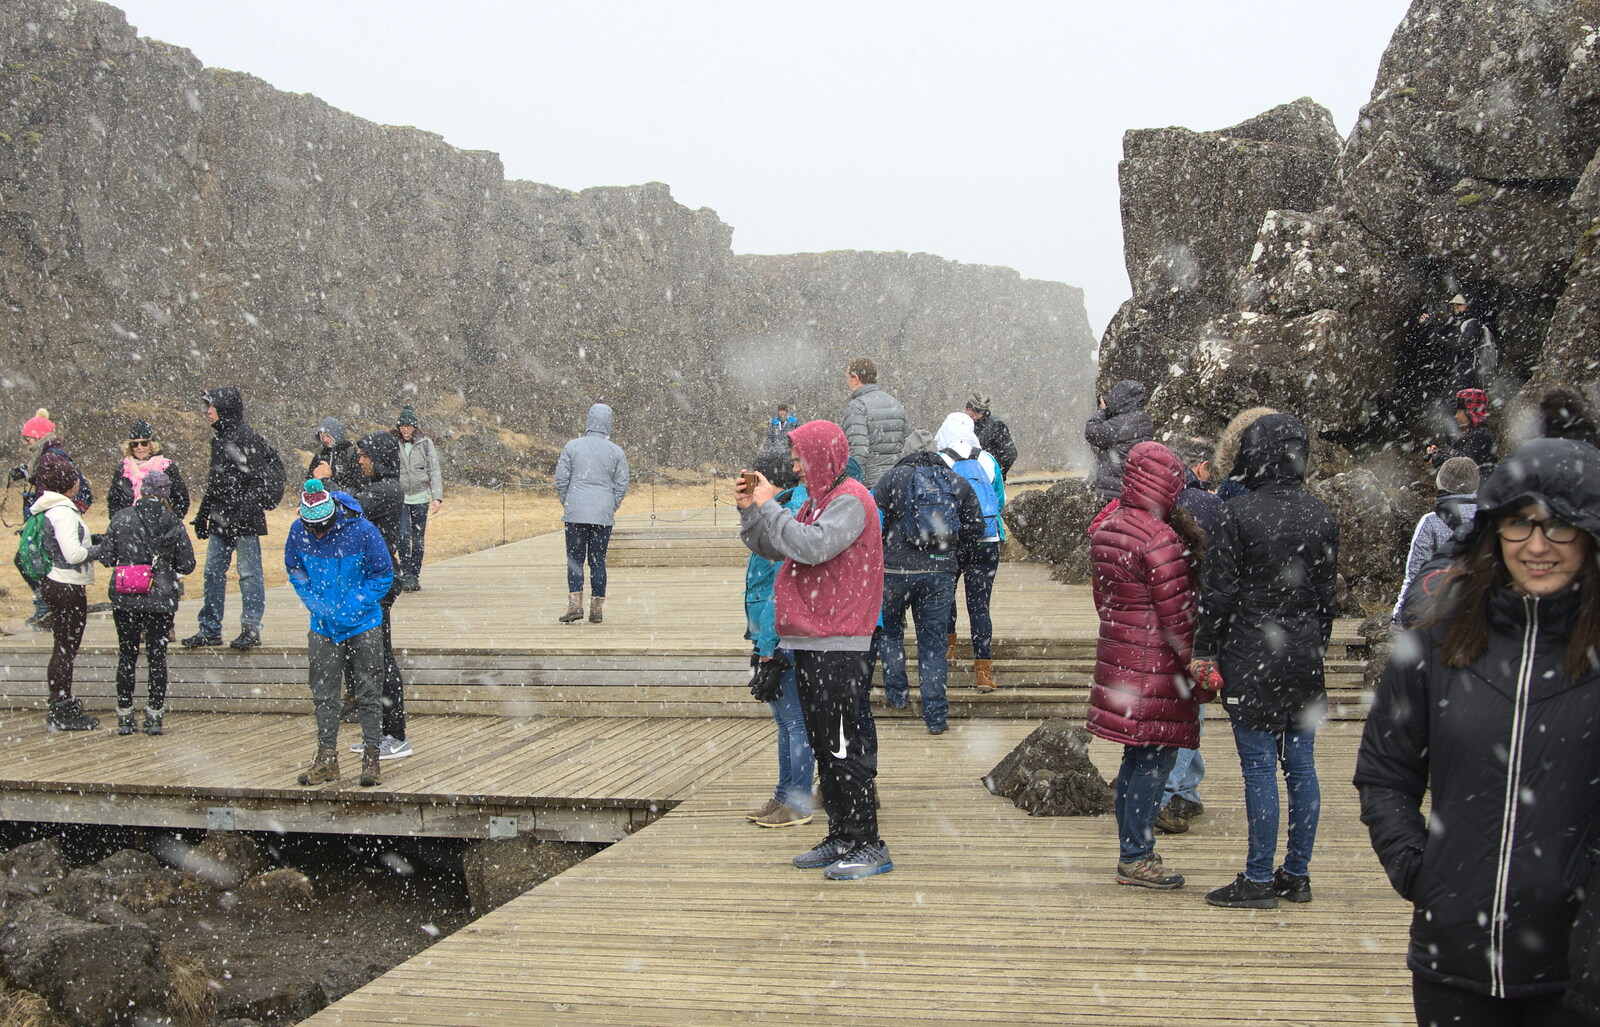 Tourists in the snow from The Golden Circle of Ísland, Iceland - 22nd April 2017